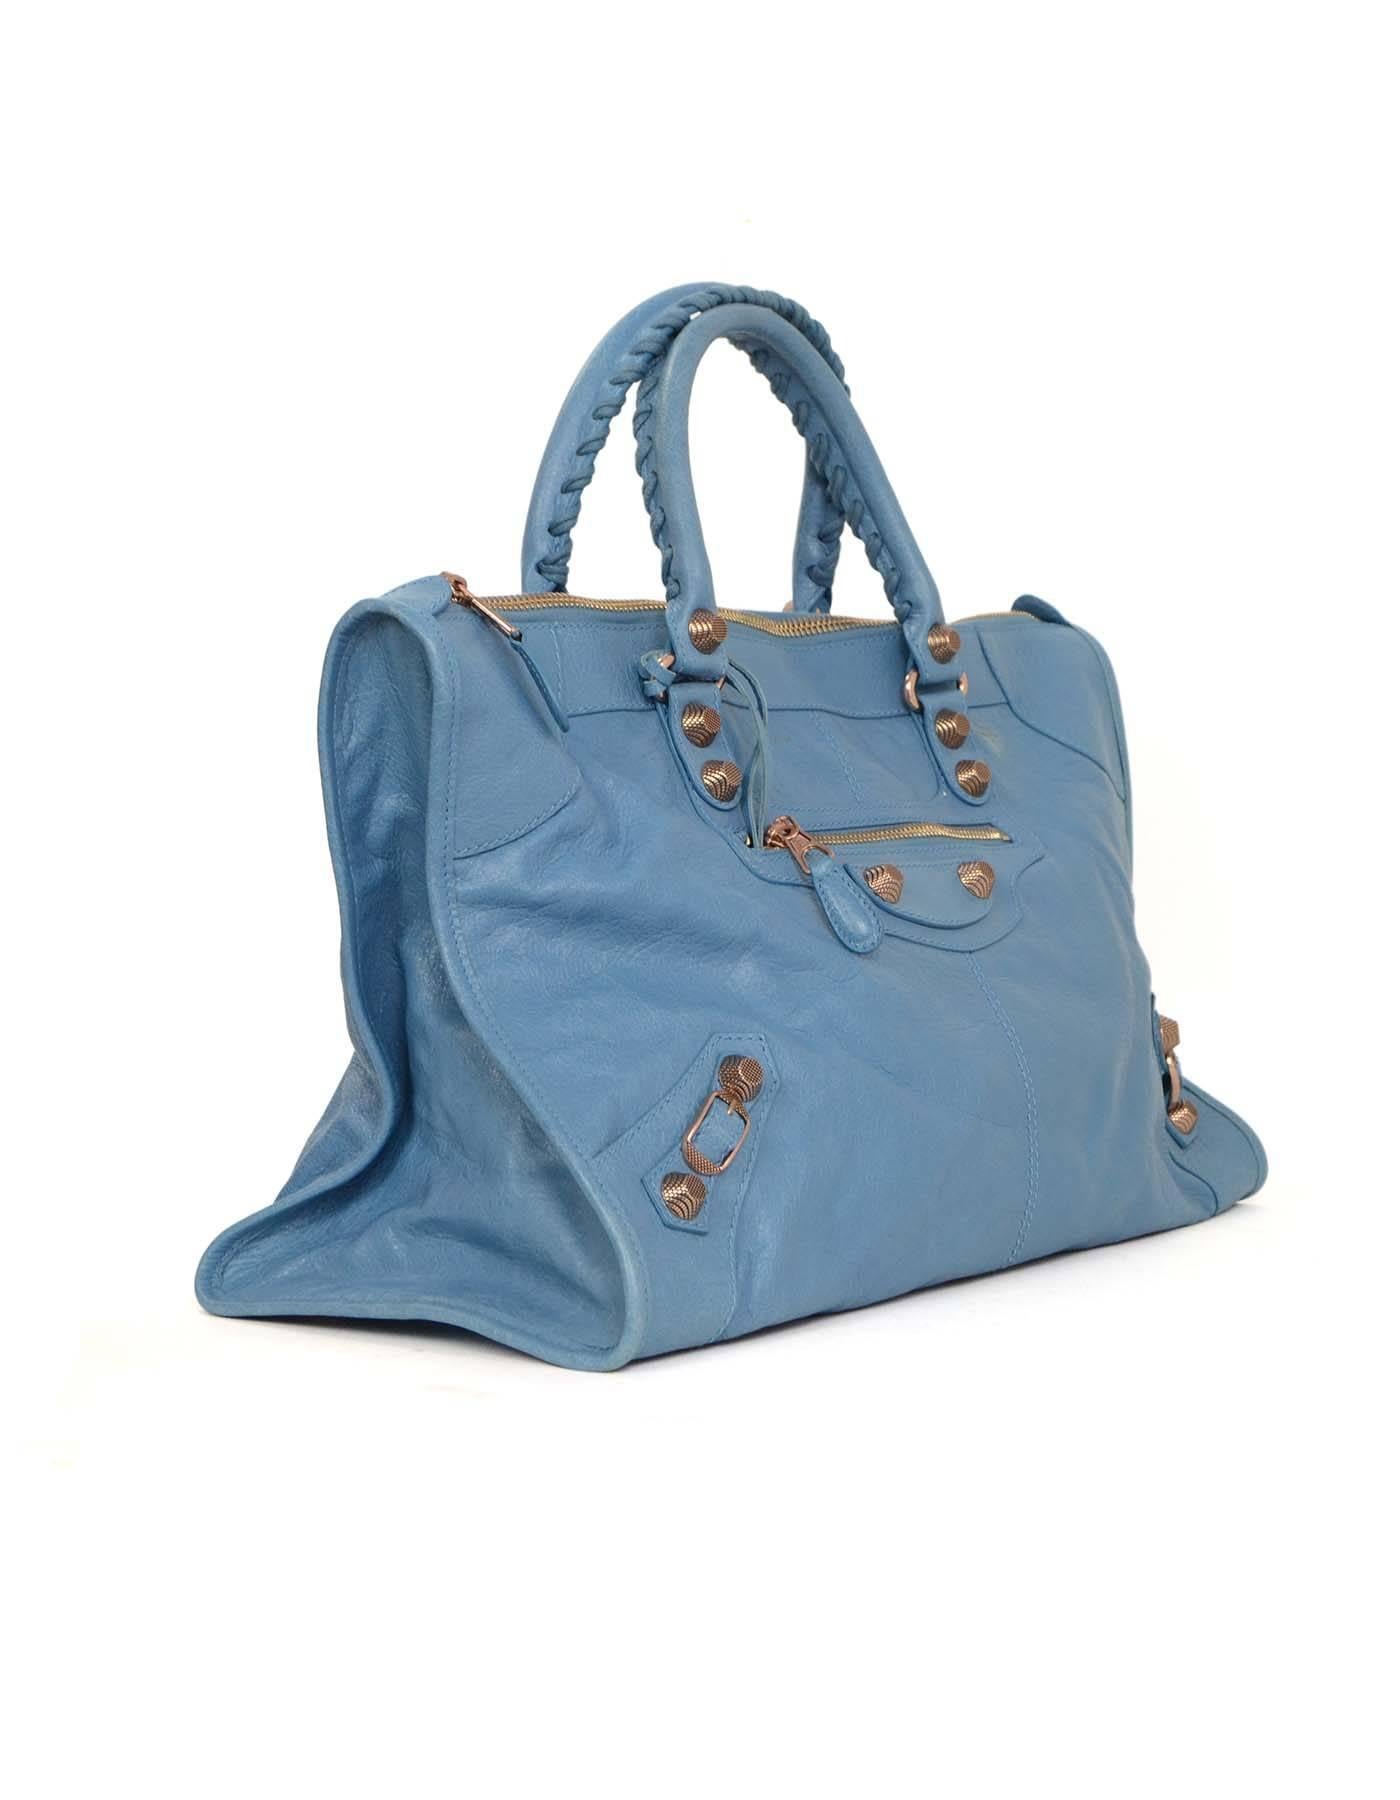 Balenciaga Blue Lambskin Leather Giant 12 Work Tote Bag 
Features zip pocket at front with removable mirror tag.  Rose gold giant hardware.

Made In: Italy
Color: Blue
Hardware: Rose gold
Materials: Lambskin leather
Lining: Black